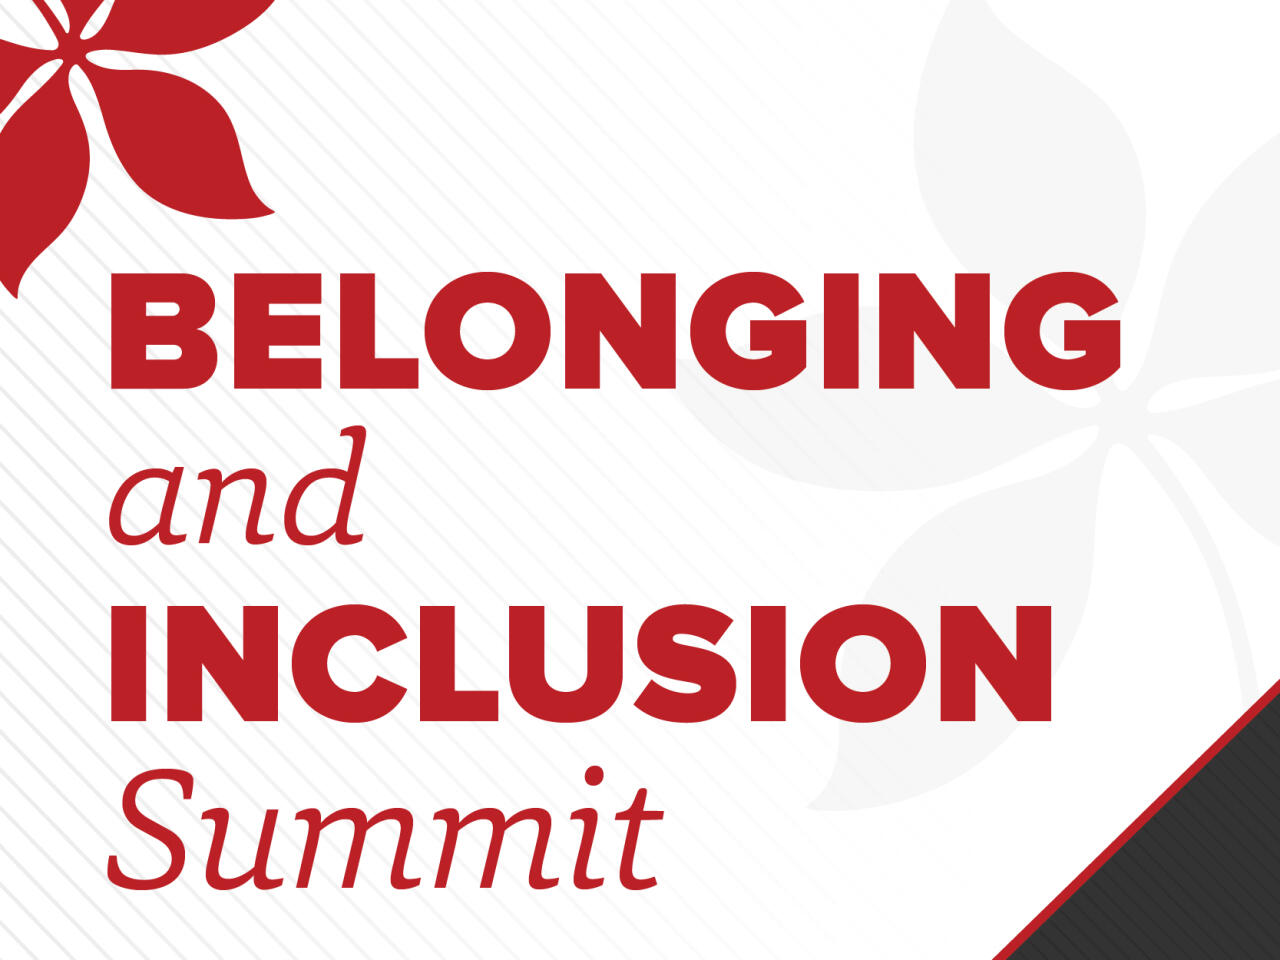 Student Life's Belonging and Inclusion Summit